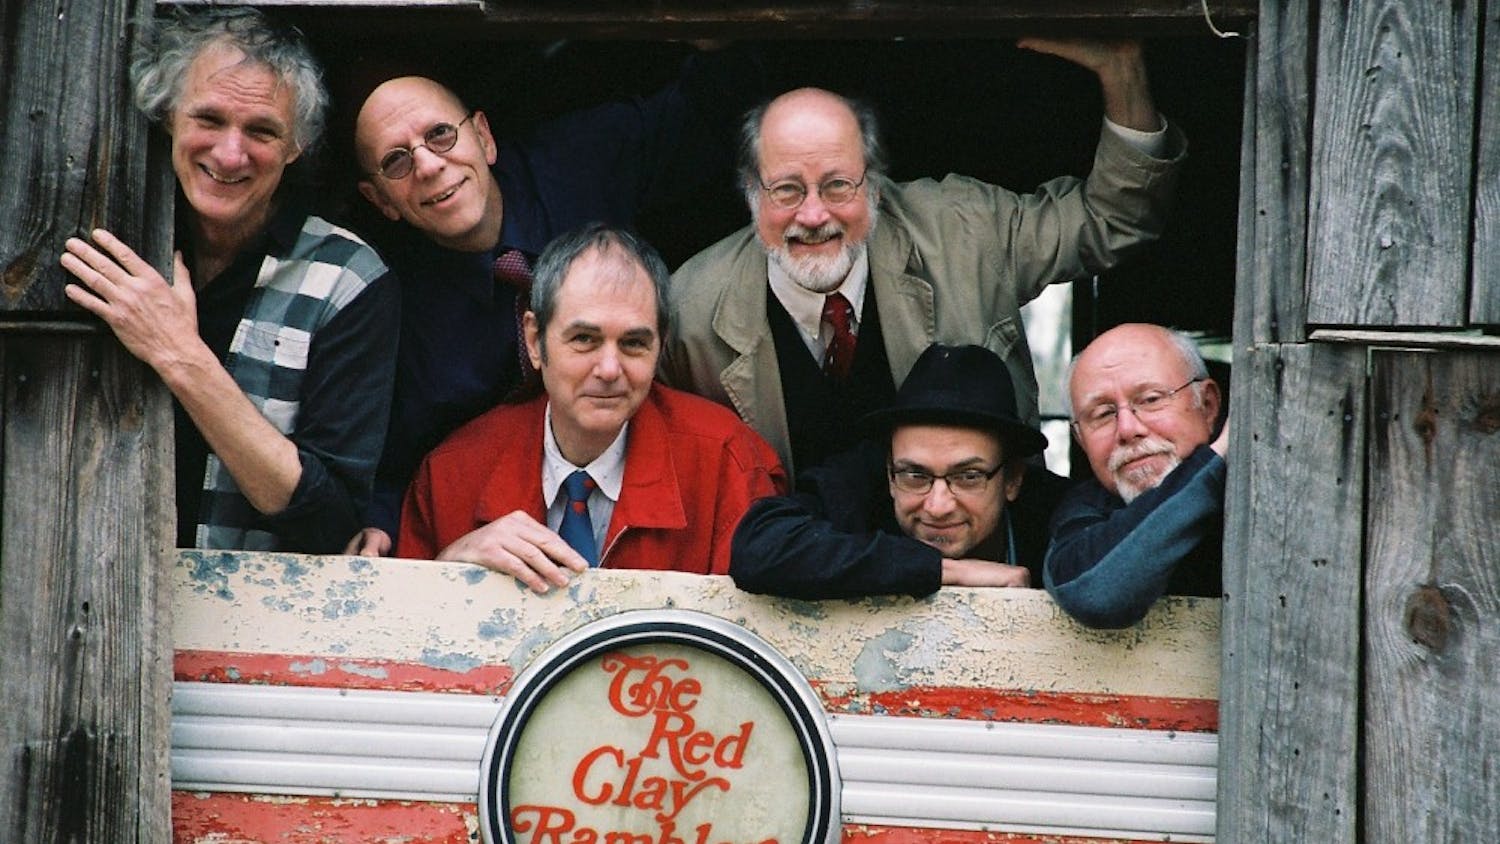 The Red Clay Ramblers, posing in an old wooden structure.Photo courtesy of Bland Simpson